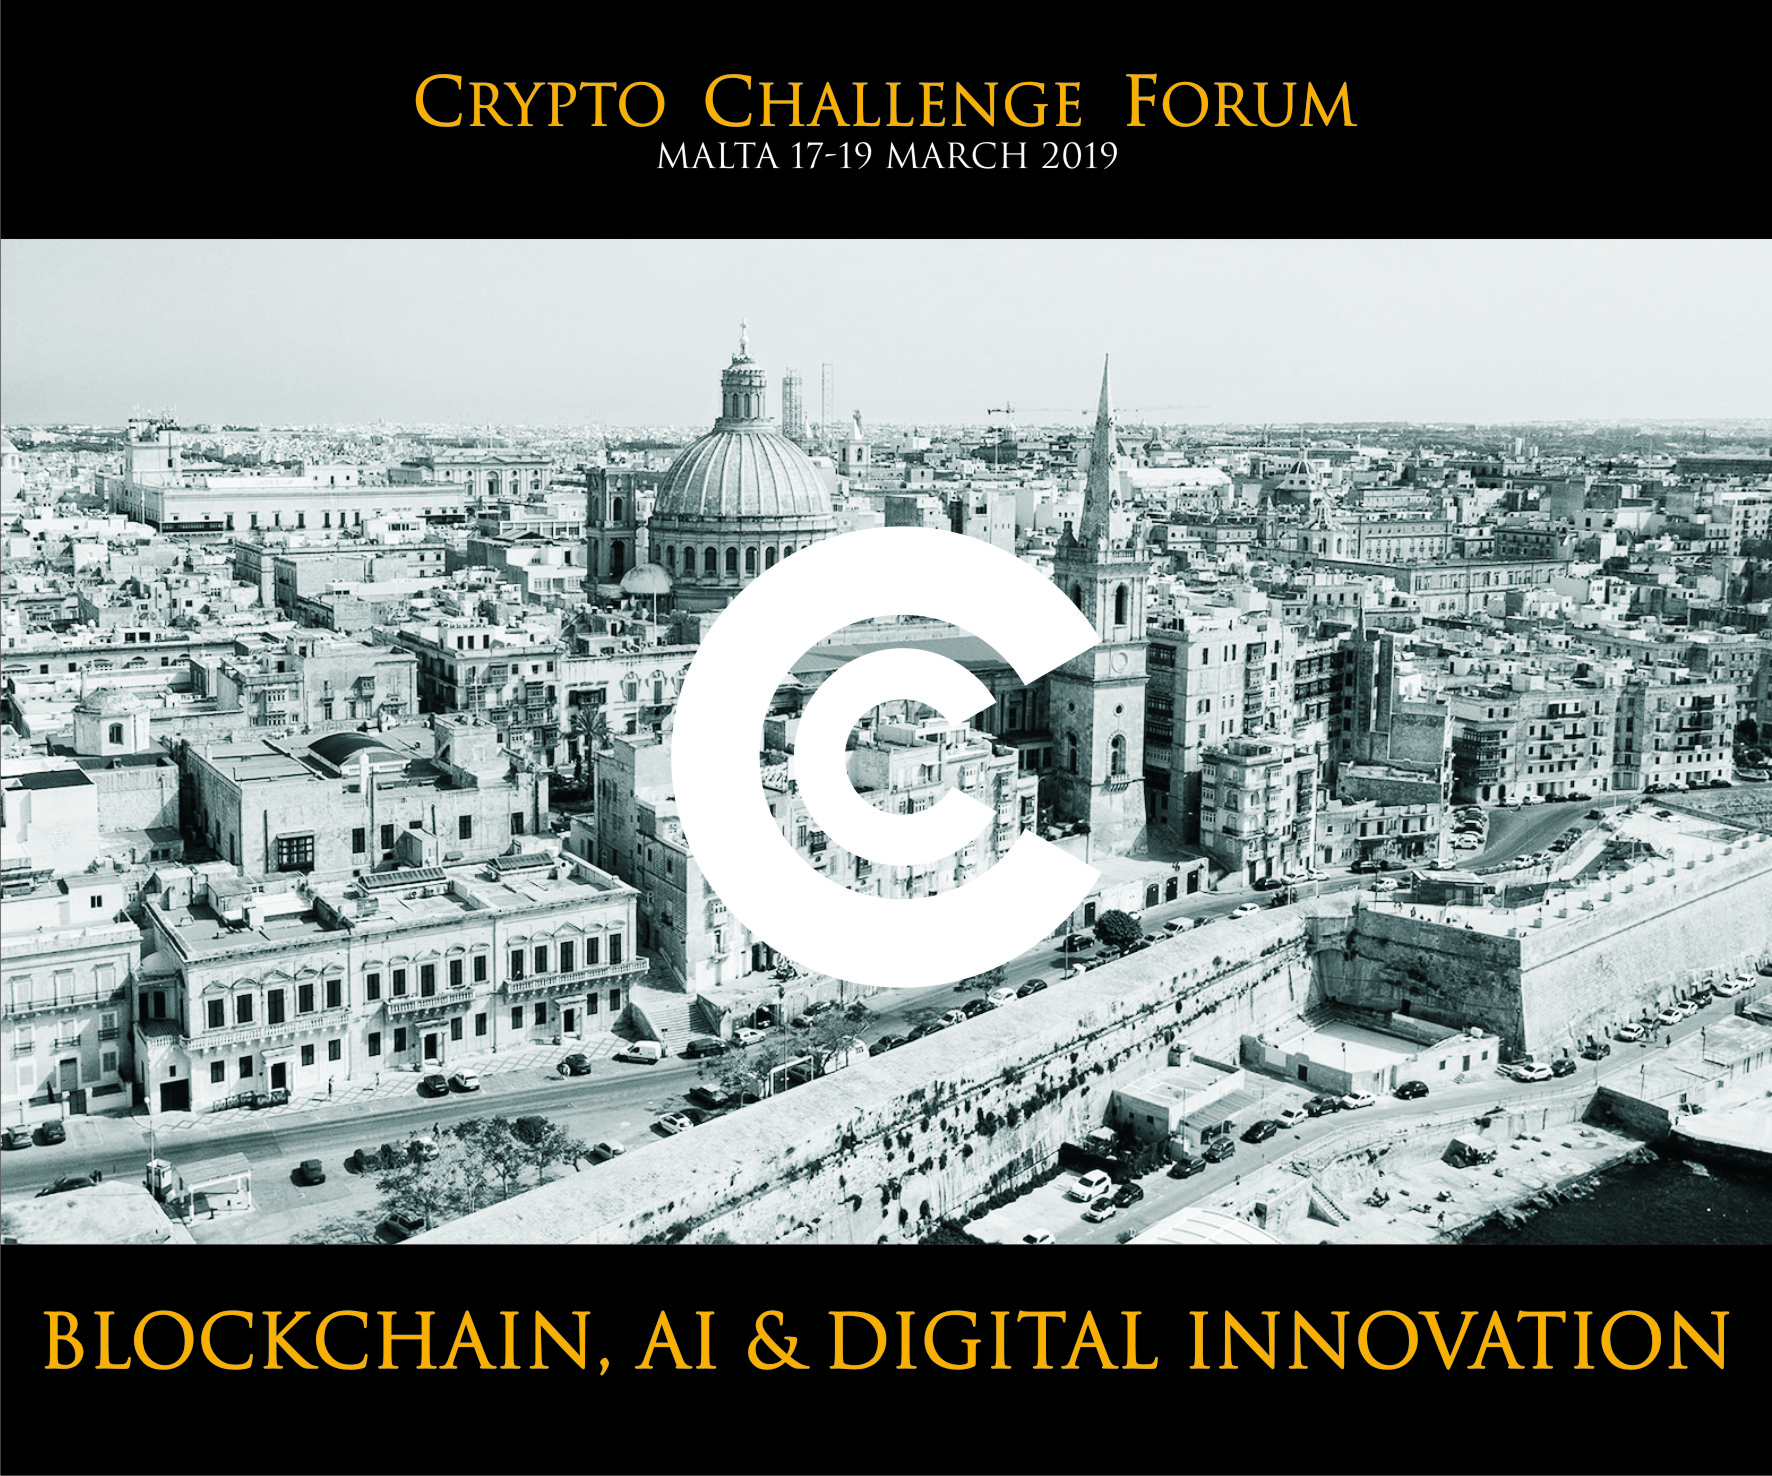 Press Release CC Forum Malta Blockchain, AI and Digital Innovation CC Forum is one of the world's major industry events. It will take place on 17-19 March 2019 in Malta connecting global thought leaders, policy makers, investors and startups from across the world for a 3 day top content event. It will be attended by the industry leaders, think tanks, institutional and private investors, family offices and VC firms. The Forum's highlights include: 2500+ attendees 100+ influential speakers 20+ participants of the Investors' Hub 50+ exhibititors To be inaugurated by Hon. Prime Minister, the forum is privileged to have some of the world's most authoritative speakers, some of whom are global transformers: http://www.cc-forum.com/speakers/ Split across three tracks, the Forum's agenda will address a wide range of issues including Blockchain and Foreign Direct Investment, the Future of Digital Investment and the Regulatory Framework of the Blockchain & Crypto Space. Part of the Forum's programme are one-to-one duels where heavyweights will engage in heated public debates on the big issues of the space with the conference audience being interactively involved. The Forum will see an unprecedented agenda «The World's Ecosystems and Crypto Investment» where a whole track will be given to crypto friendly governments who will be showcasing their ecosystems and highlighting their blockchain initiatives. Global announcements are expected to be made. A distinctive feature of CC Forum is the Investors' Hub – an exclusive networking area where the brightest startups will have access to decision makers representing participating investment funds, VC firms and family offices, with a total of 70B USD under management. An ICO contest with 100K prize pool to be distributed in three prizes will be held alongside the two day exhibition in the Hall's lobby. Last, but not least, the Forum abounds in a rich networking programme ranging from postconference receptions to private VIP retreats. It will culminate in the Gala Dinner & Awards Giving Ceremony.